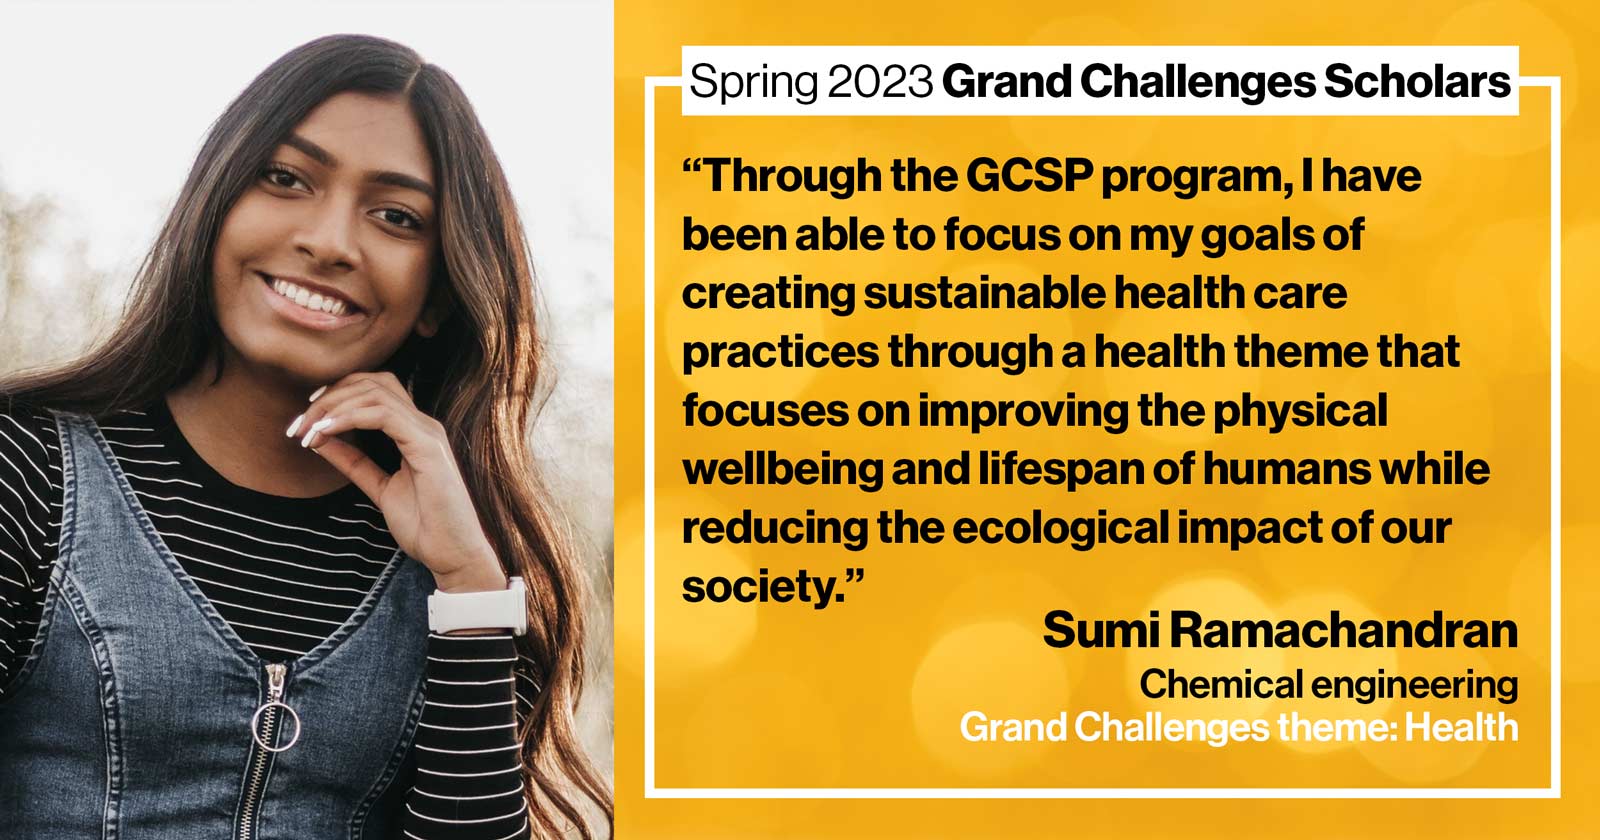 "Sumi Ramachandran Chemical engineering Grand Challenge: Health Quote: “Through the GCSP program, I have been able to focus on my goals of creating sustainable health care practices through a health theme that focuses on improving the physical wellbeing and lifespan of humans while reducing the ecological impact of our society.”"